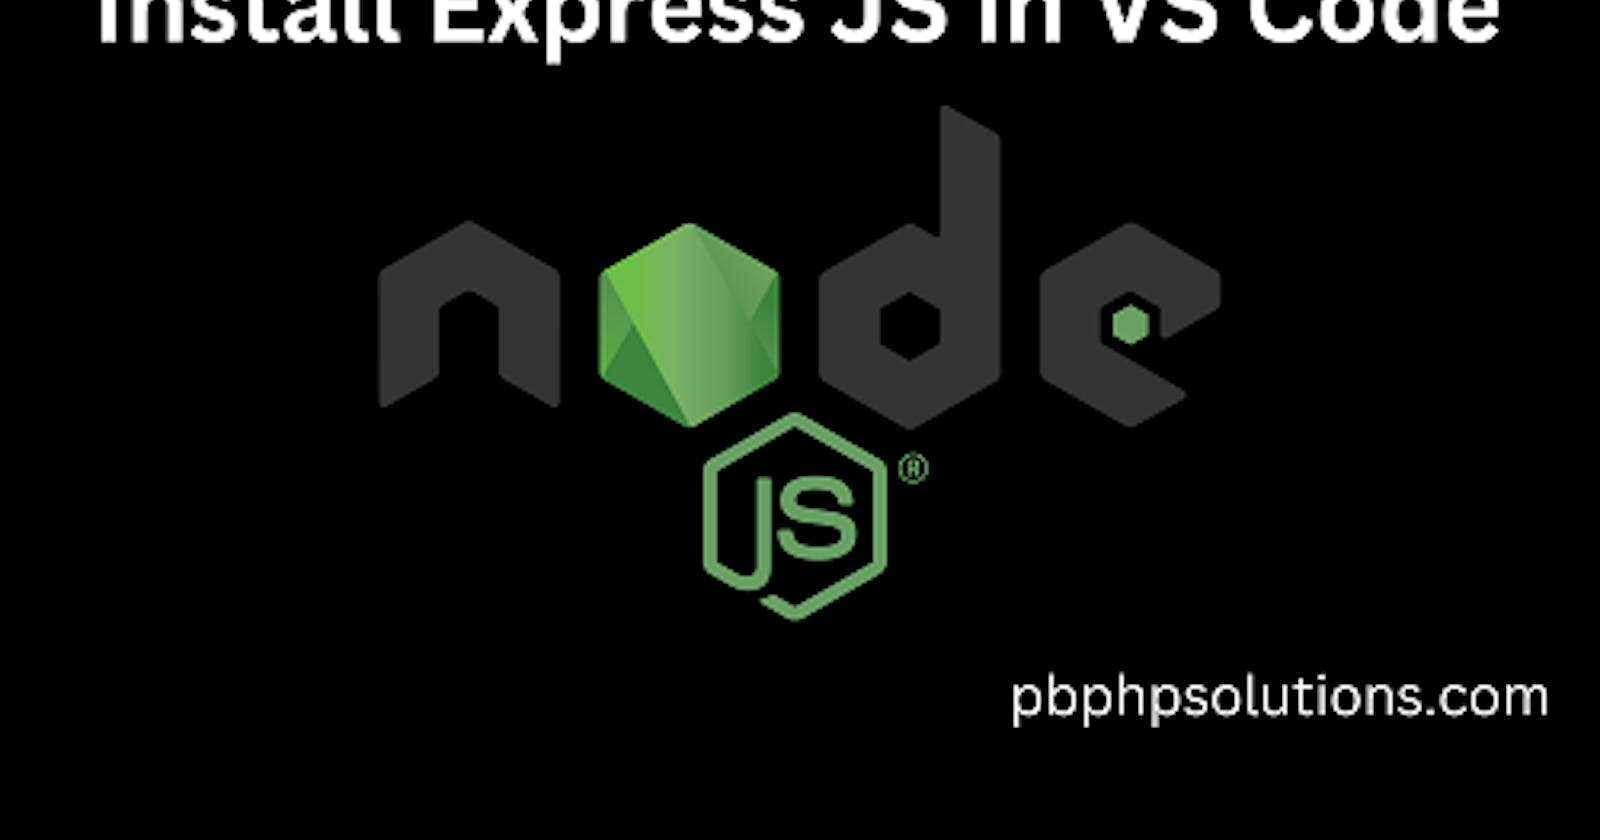 How to install Express js in vs code with an example